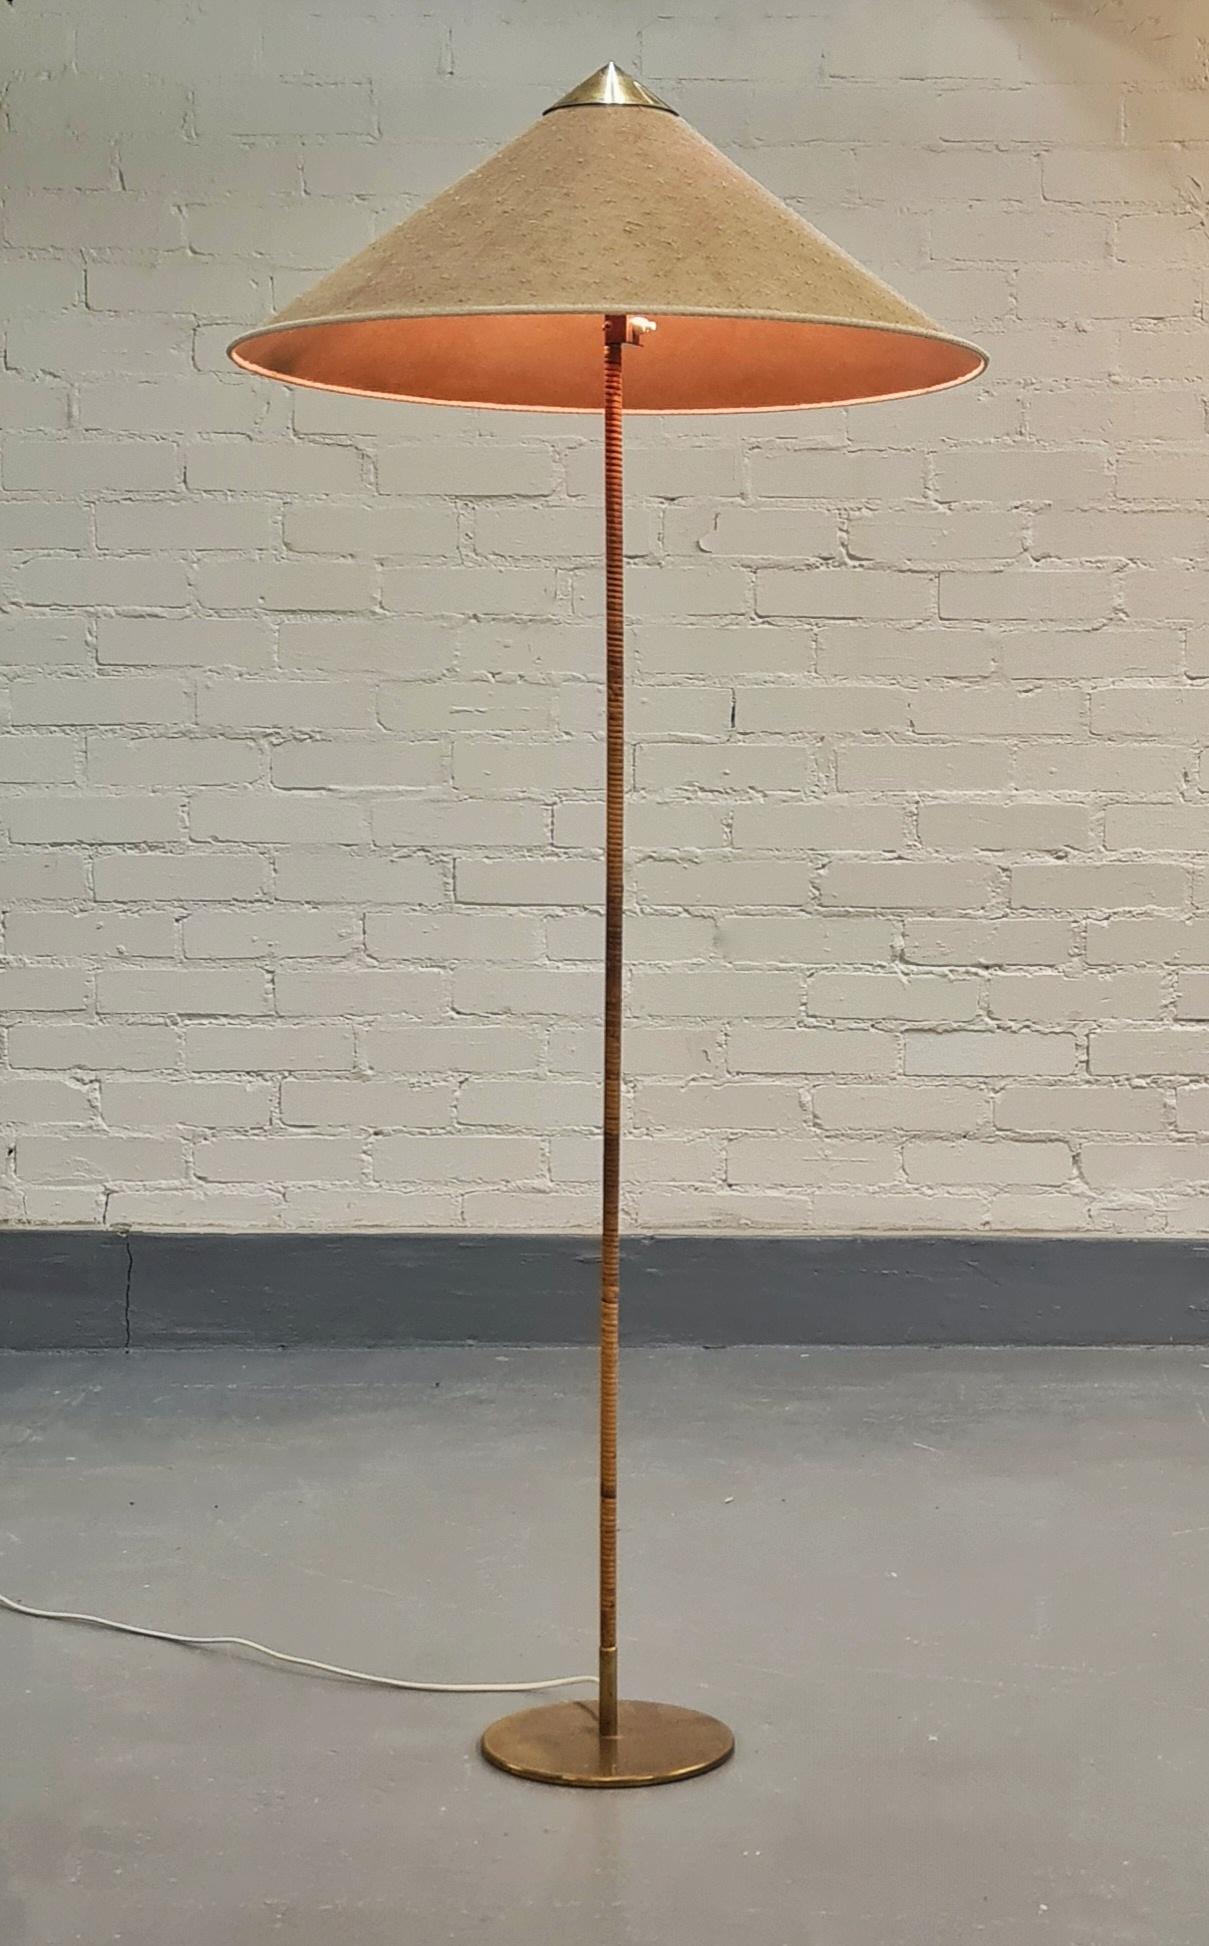 This iconic floor lamp was originally designed by Paavo Tynell in the late 1930s and has been refined during the golden era of the Tynell design in the second half of the 1940s. This exquisite lamp still retains all of the original parts including